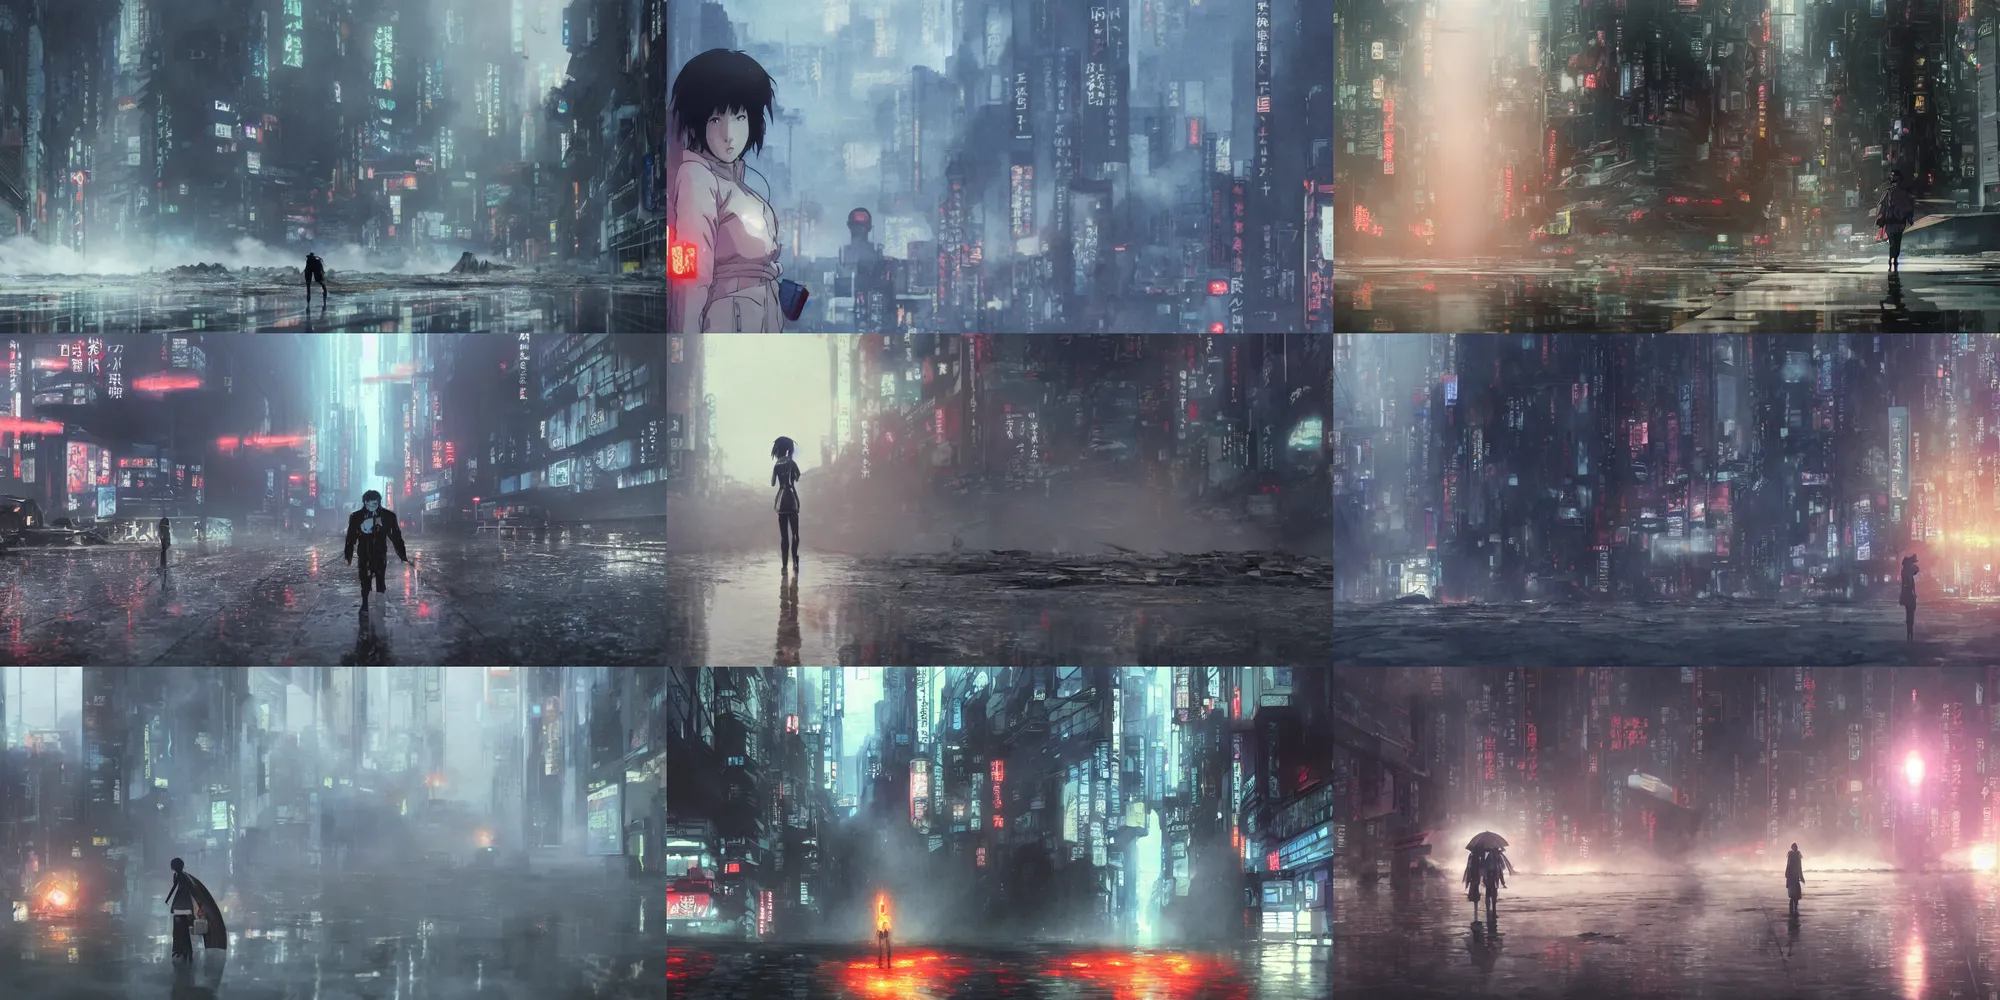 Prompt: incredible wide screenshot, ultrawide, simple water color, paper texture, katsuhiro otomo ghost in the shell anime movie scene, backlit death defying action shot girl in parka, wet dark road, parasol, destroyed tachikoma, earthquake destruction, reflection, thick fog, smoke, destroyed robots, blazing fire, burning bus crash inferno